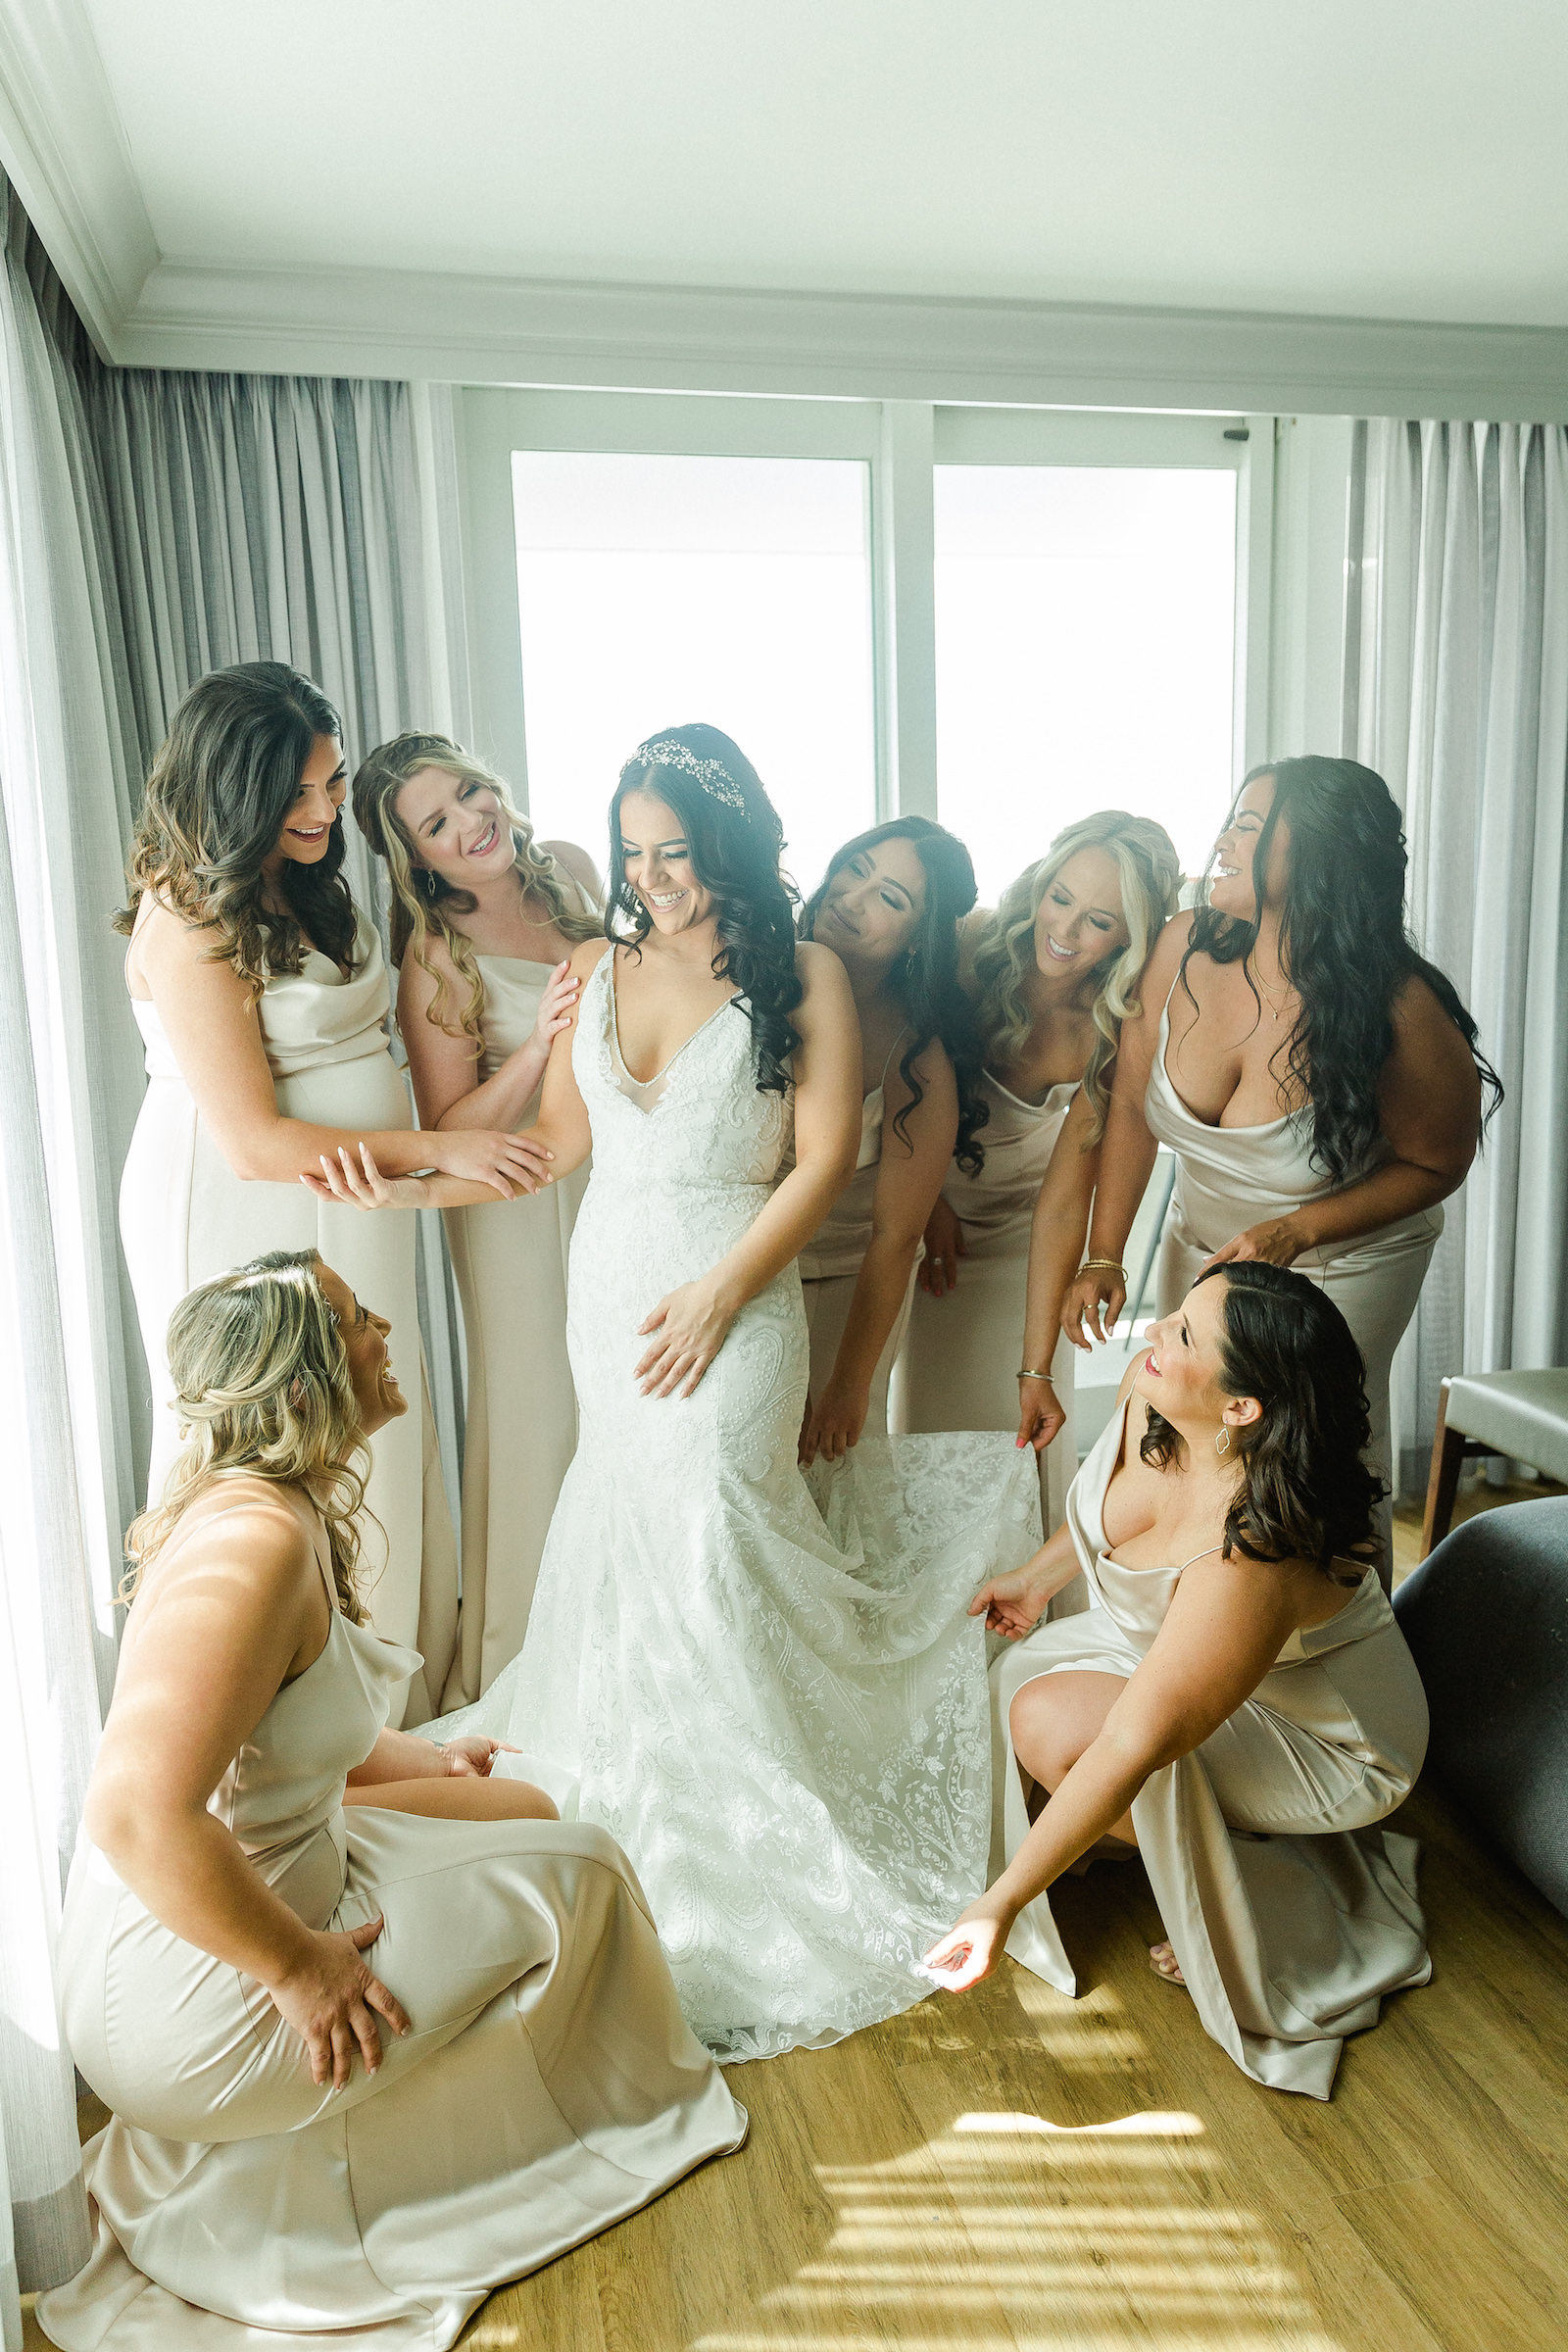 Romantic Bride Wearing Lace Fit and Flare Wedding Dress with Bridesmaids Wearing Gold Dresses | Tampa Bay Wedding Hair and Makeup Femme Akoi Beauty Studio | Bridesmaids Attire Bella Bridesmaids